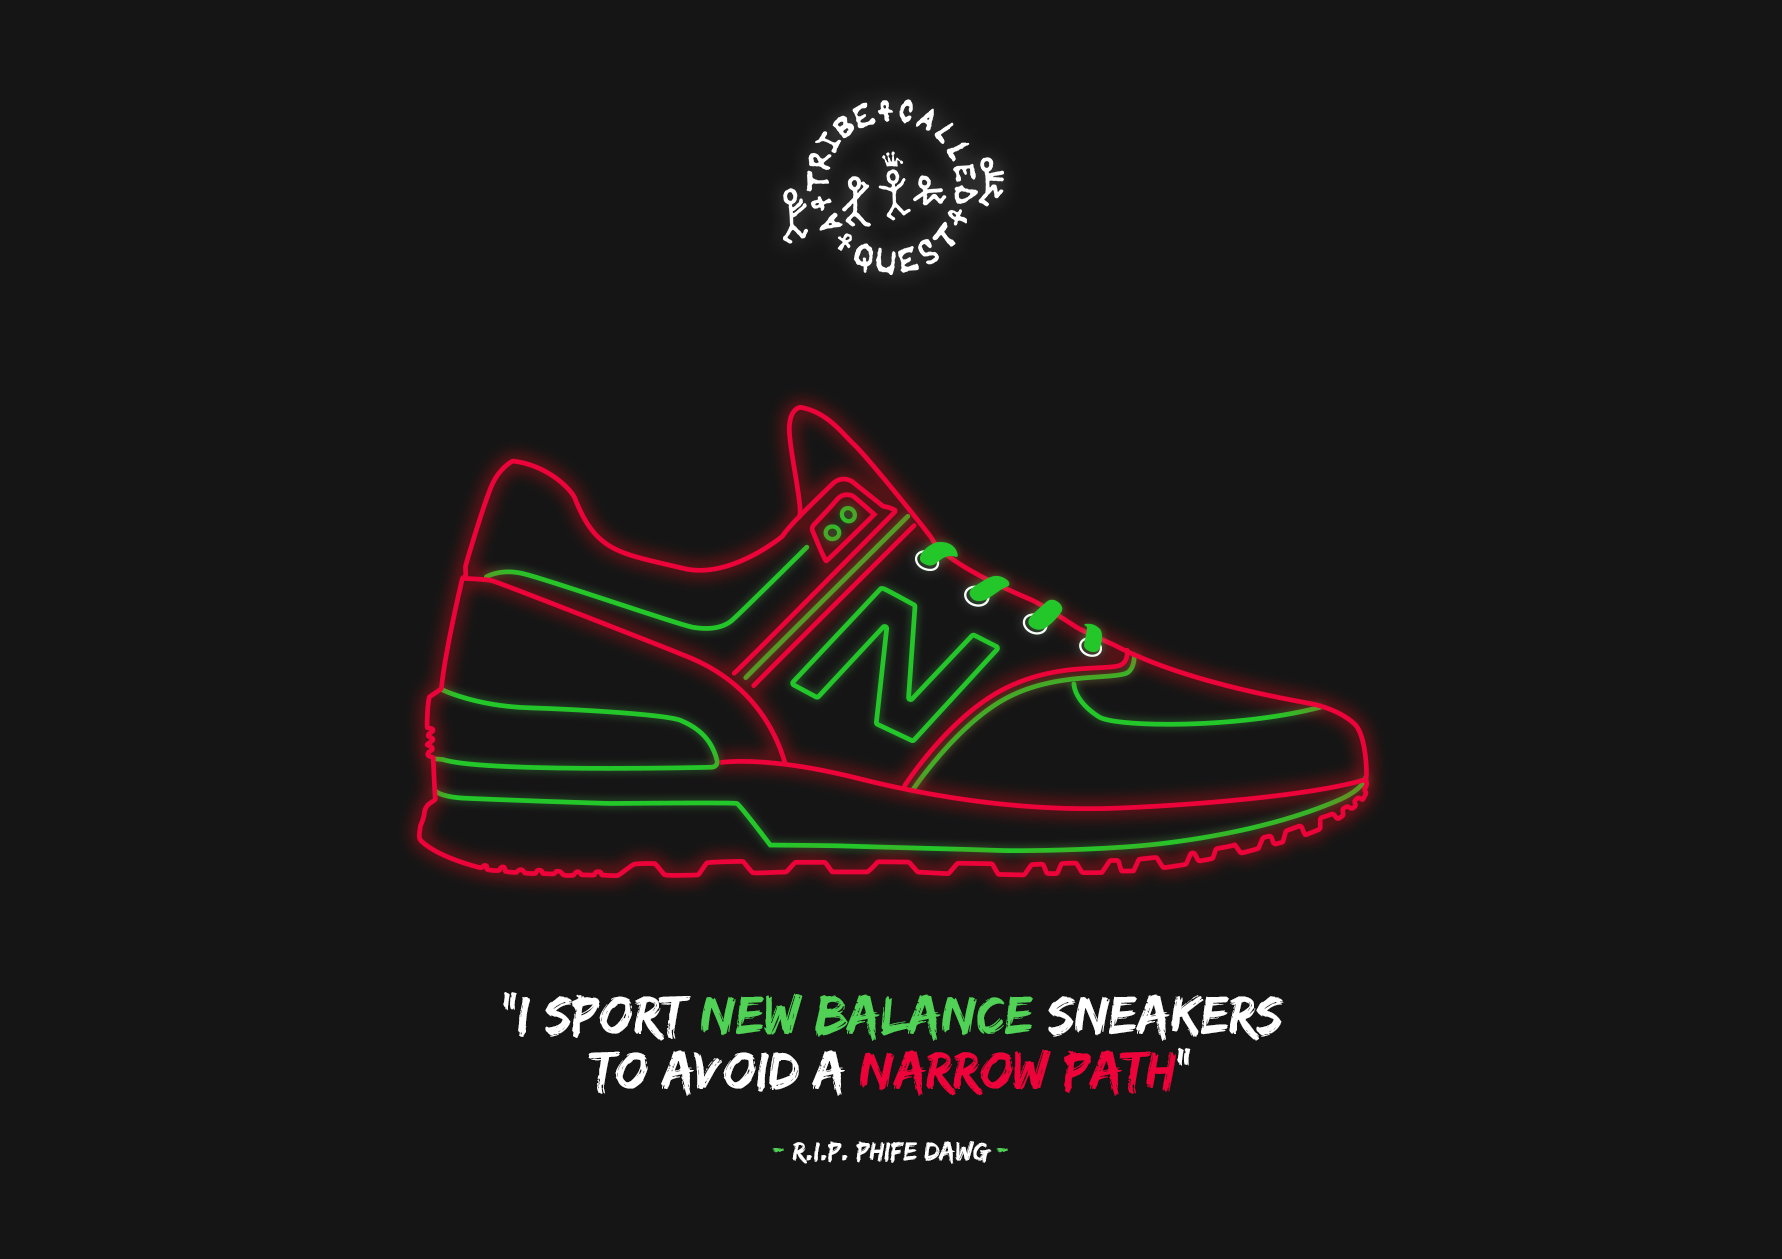 A Tribe Called Quest x New Balance